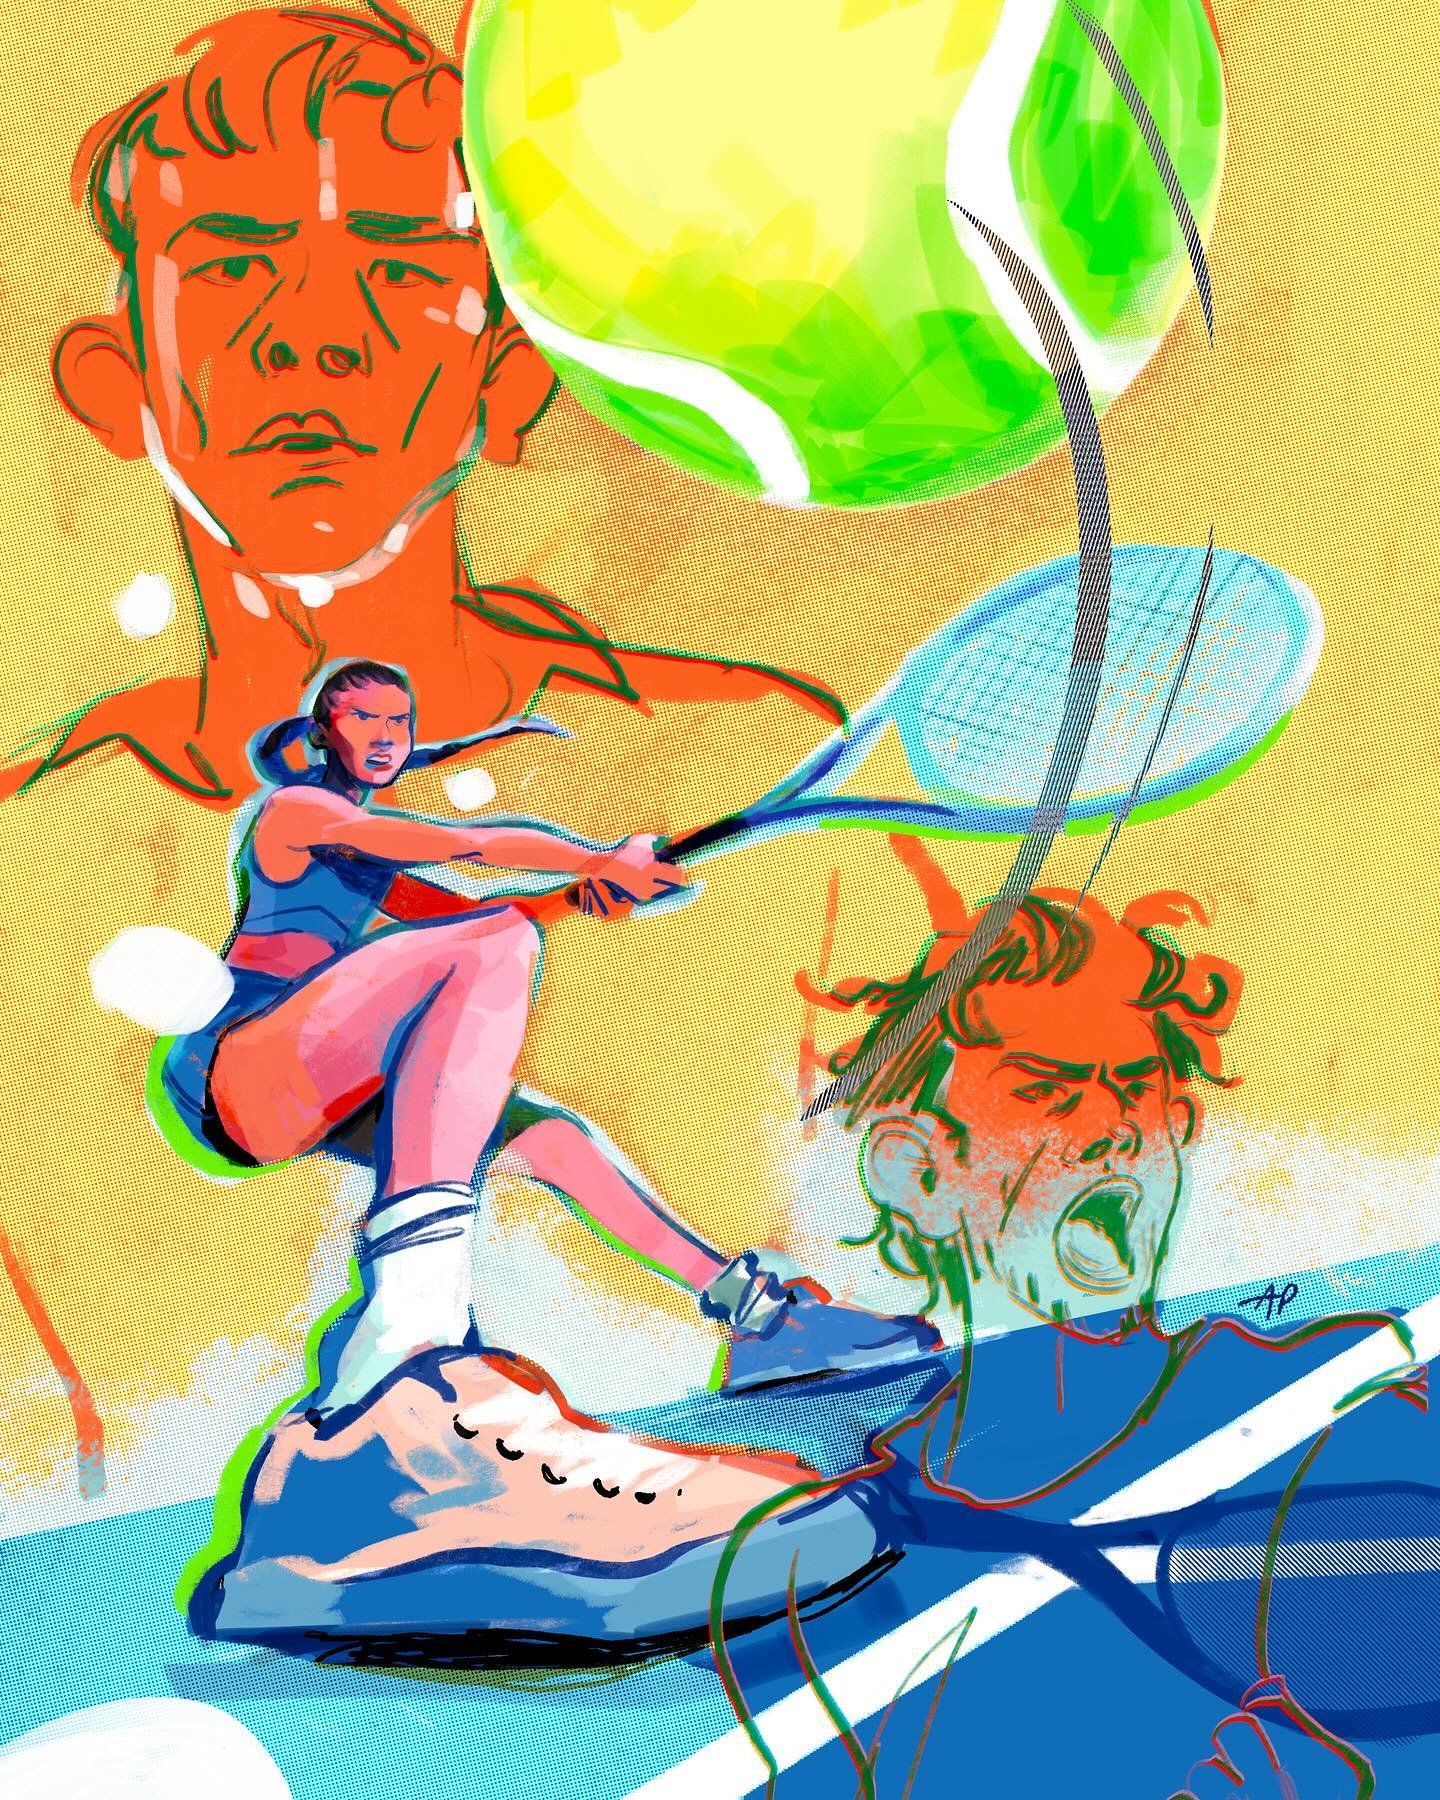 This movie!! Was!! Amazing!!!!! So tense, so visually cool🚨💦🎾 I loved this complicated trio&hellip;

Had fun playing with a new brush pack on this. Swipe for some details! 👉

#challengers #zendaya #mikefaist #joshoconnor #lucaguadagnino #illustra